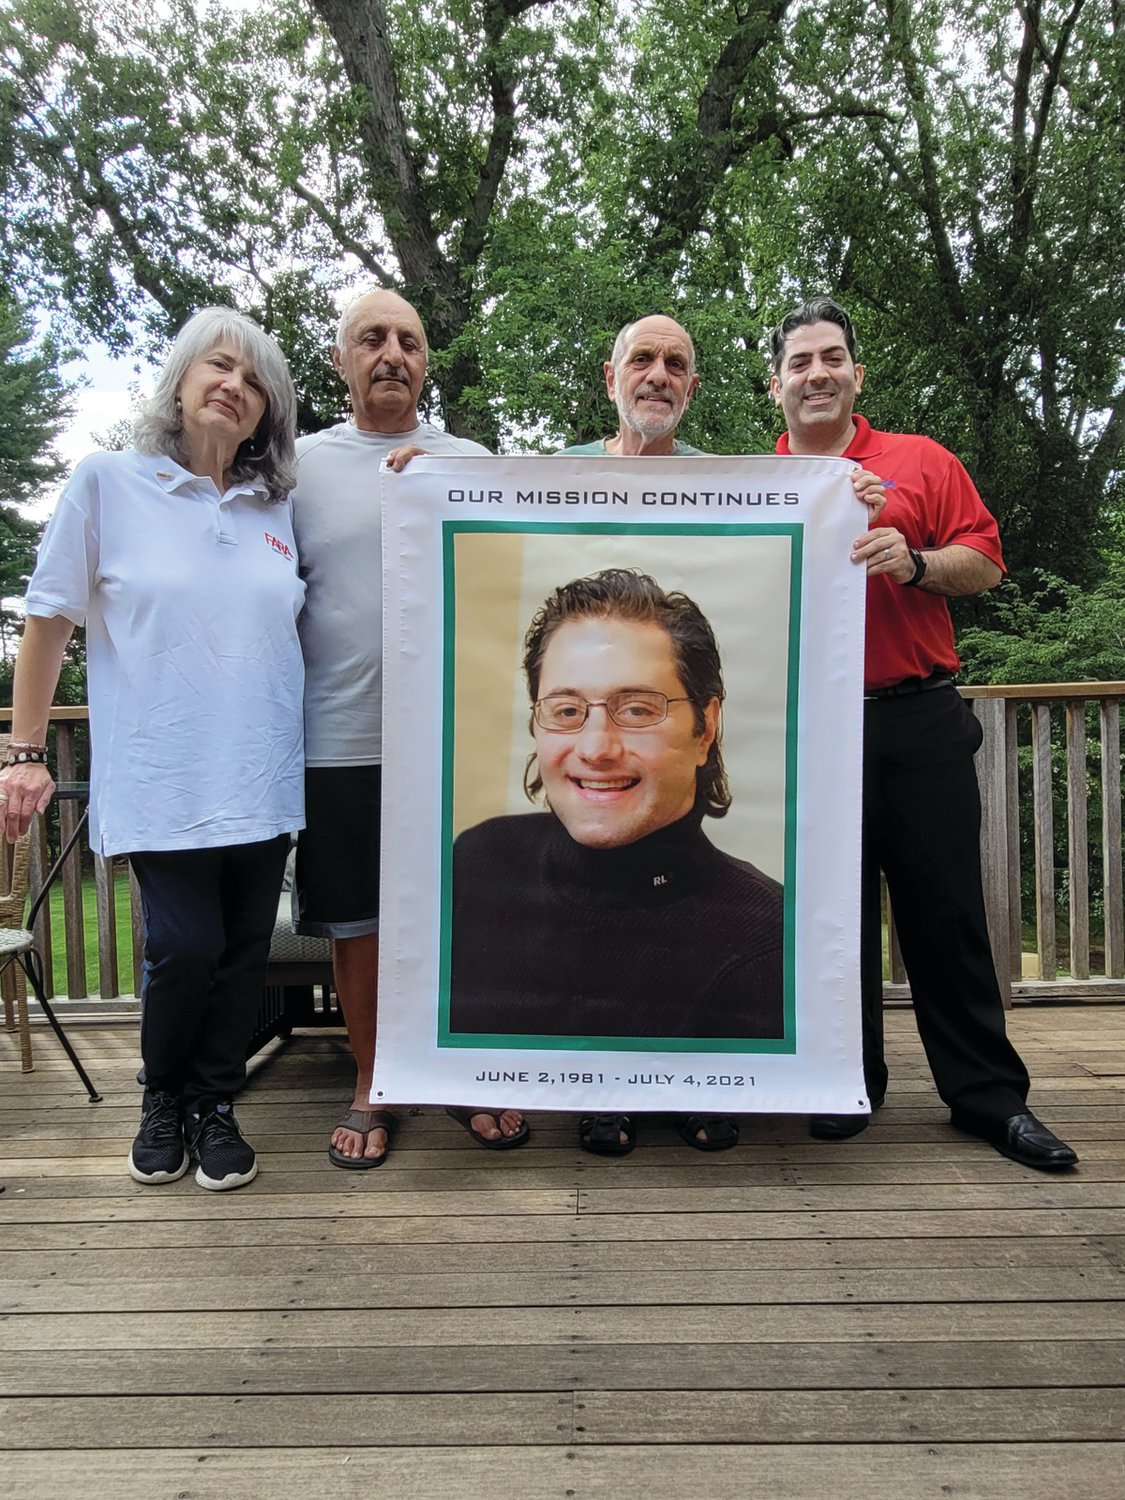 FA-MILY: Sallyann DiIorio, family friend Vincent LaFazia, Jack DiIorio and Michael Crawley, have committed to continue raising money for FARA following the death of Matthew DiIorio in July. This is their 11th year raising money for the FA advocacy group, but the first time holding events since losing Matthew to the disease.